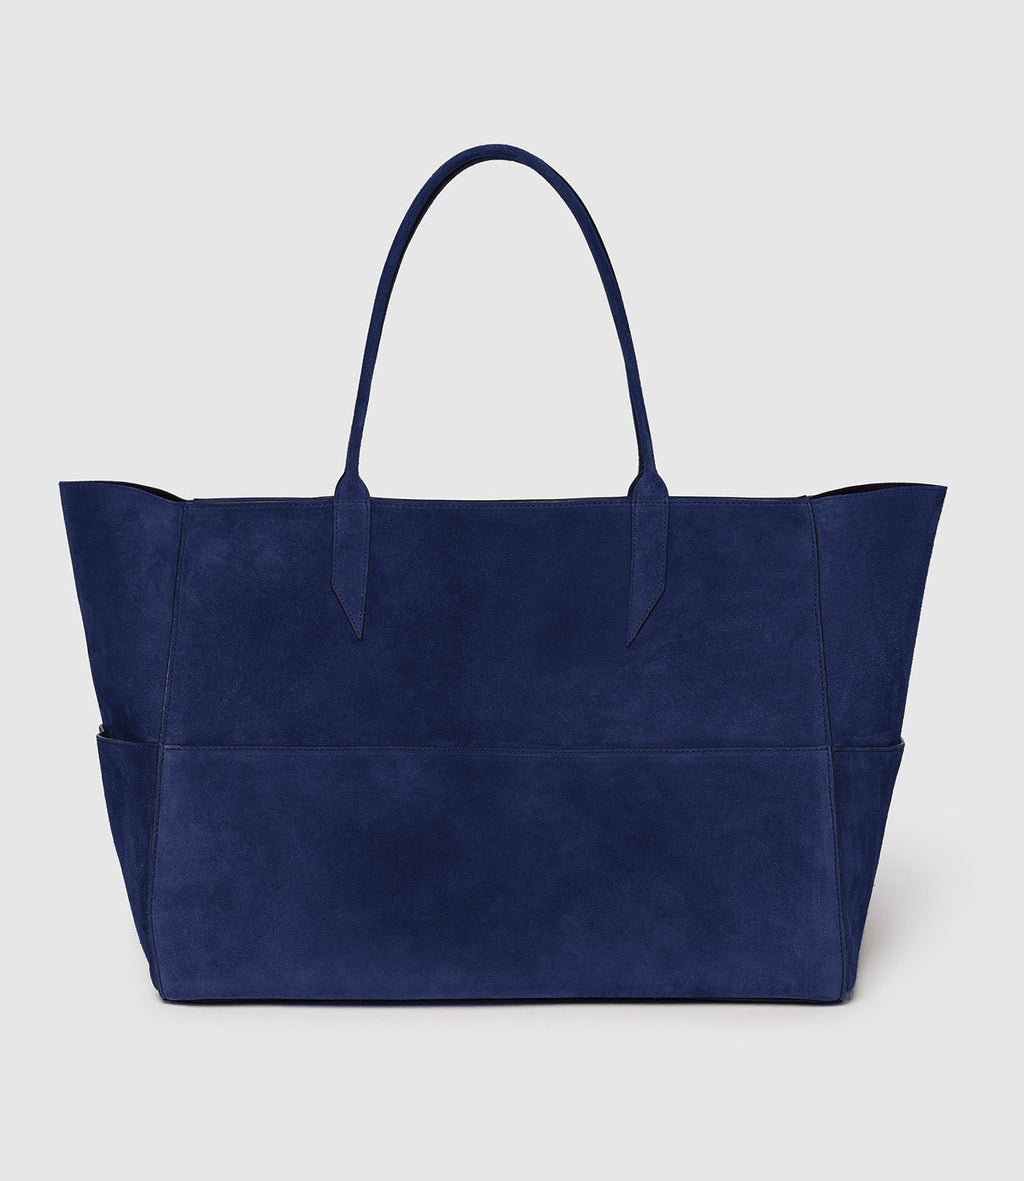 Incognito Large Suede Navy